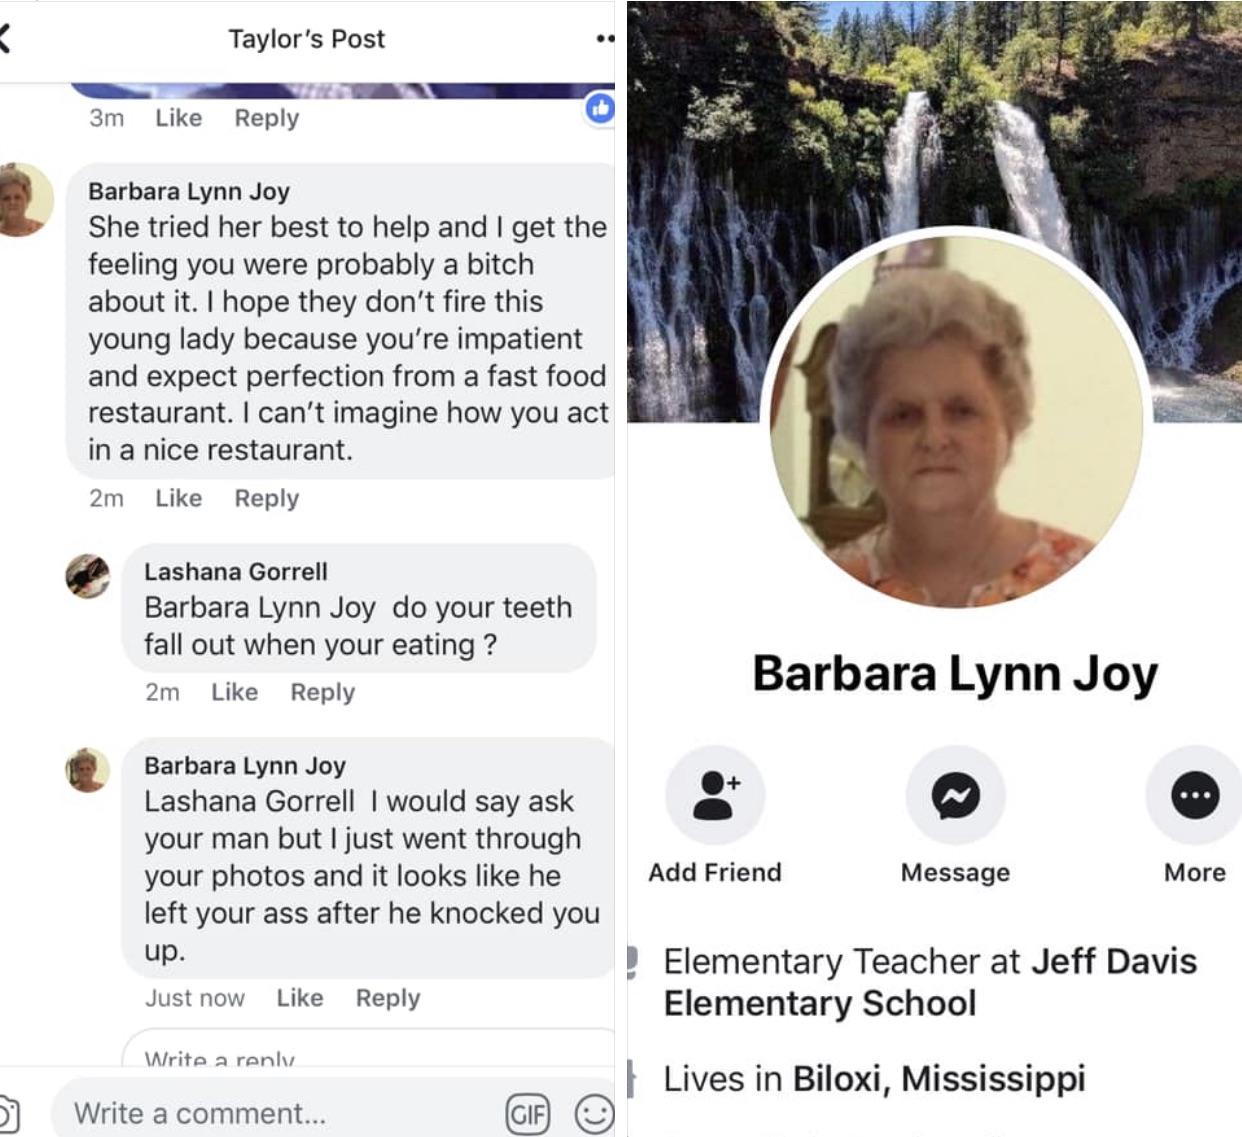 awesome randoms  - mcarthur-burney falls interpretive association - Taylor's Post m Barbara Lynn Joy She tried her best to help and I get the feeling you were probably a bitch about it. I hope they don't fire this young lady because you're impatient and e